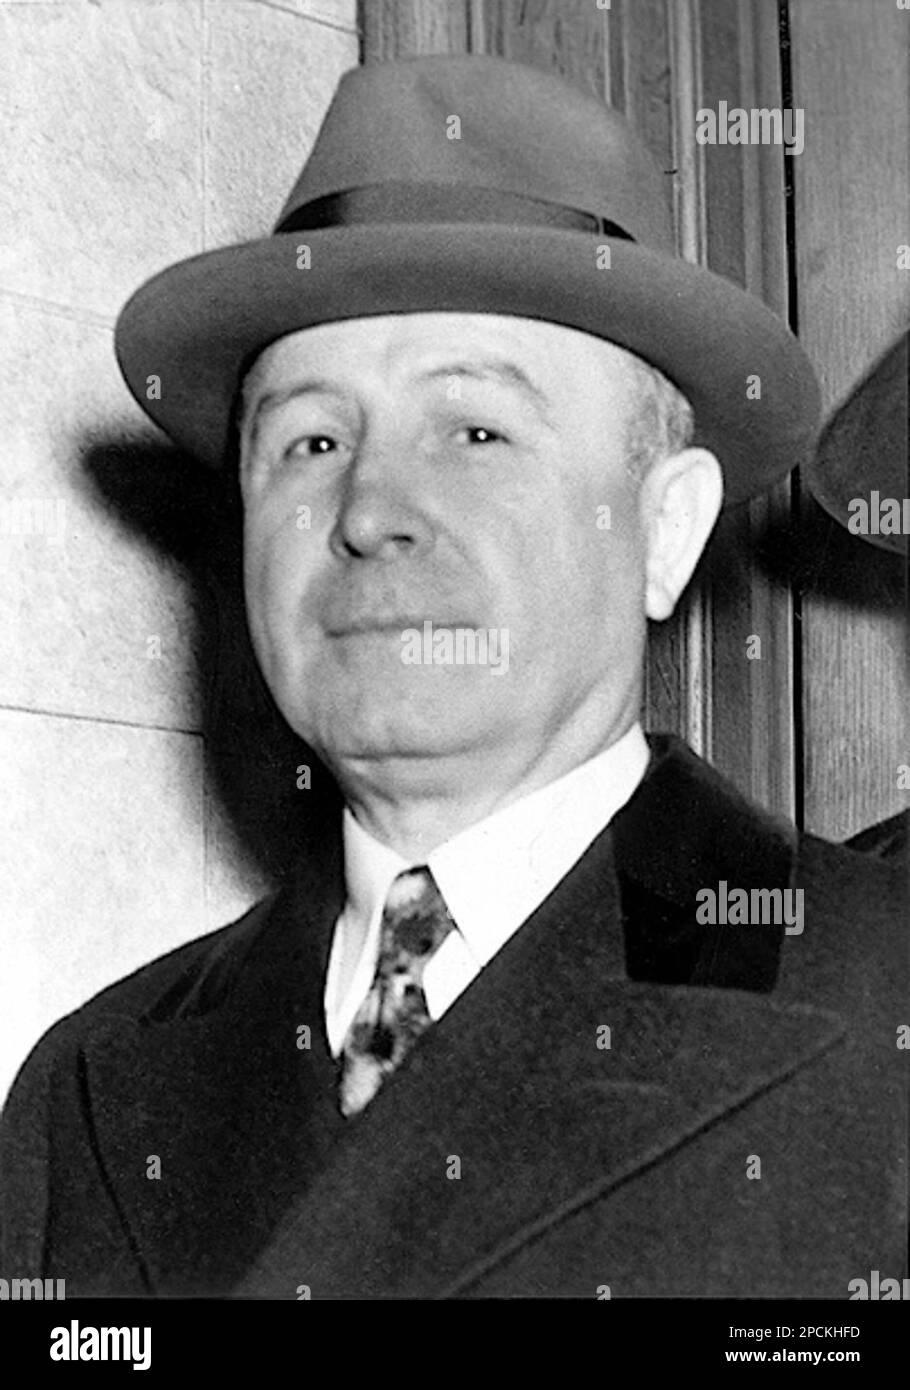 John Torrio leaving the federal court house in New York during his trial. Stock Photo